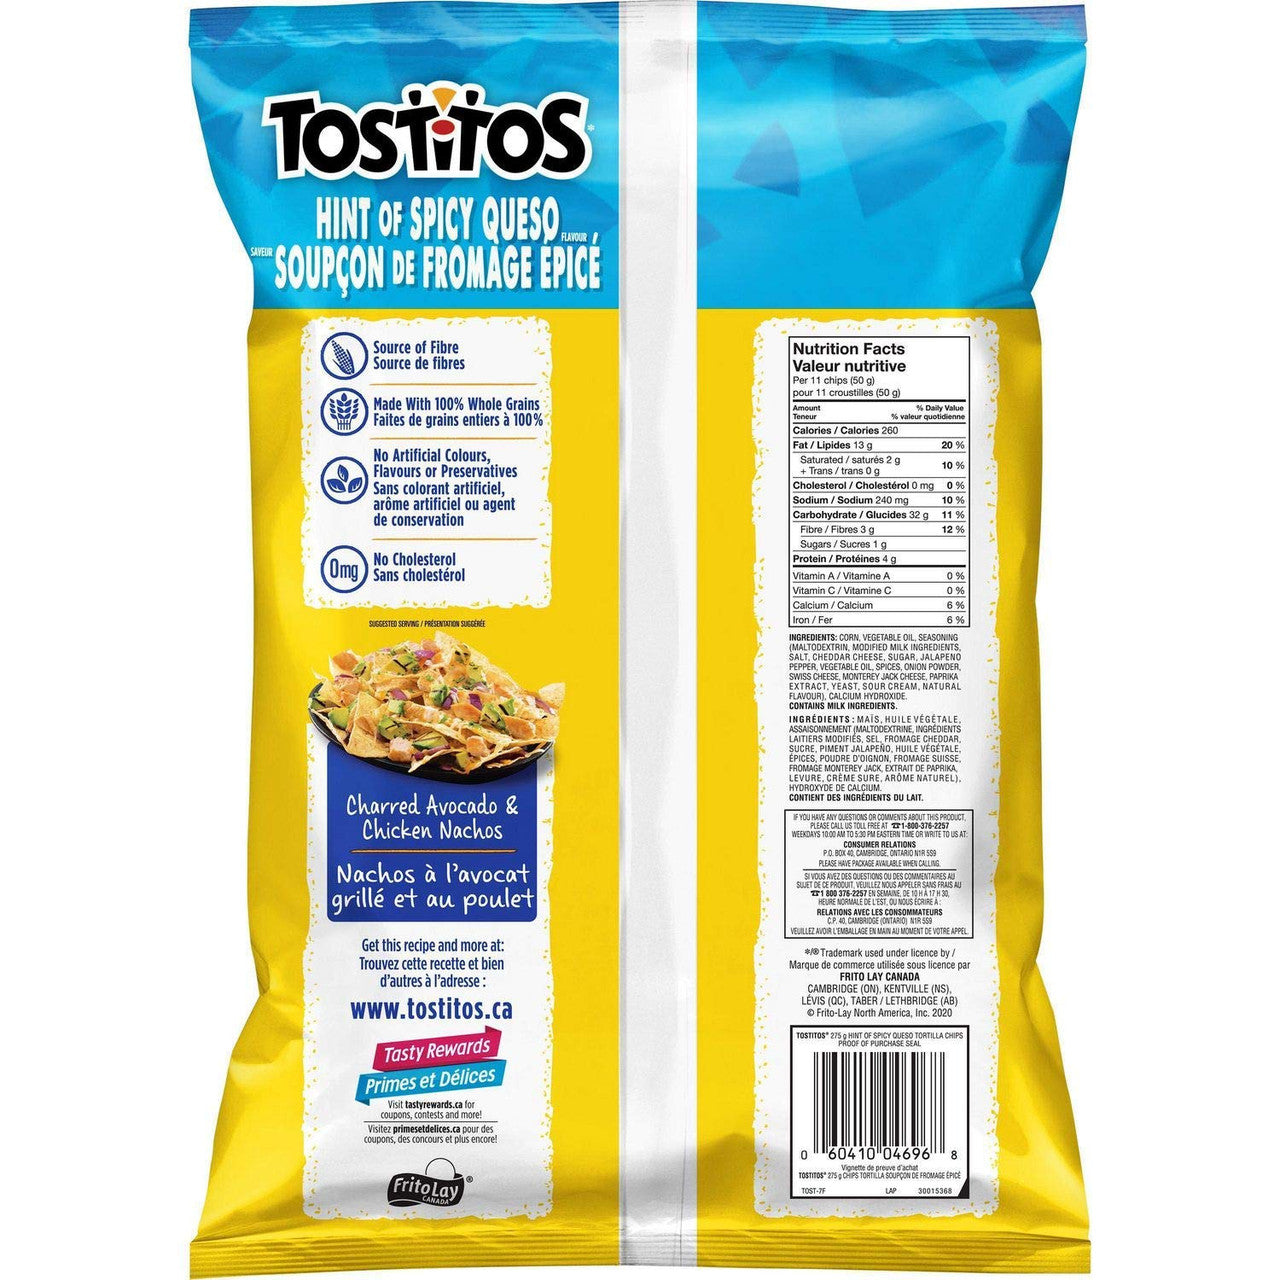 Tostitos Hint of Spicy Queso Tortilla Chips 275g/9.7oz, 2-Pack {Imported from Canada}